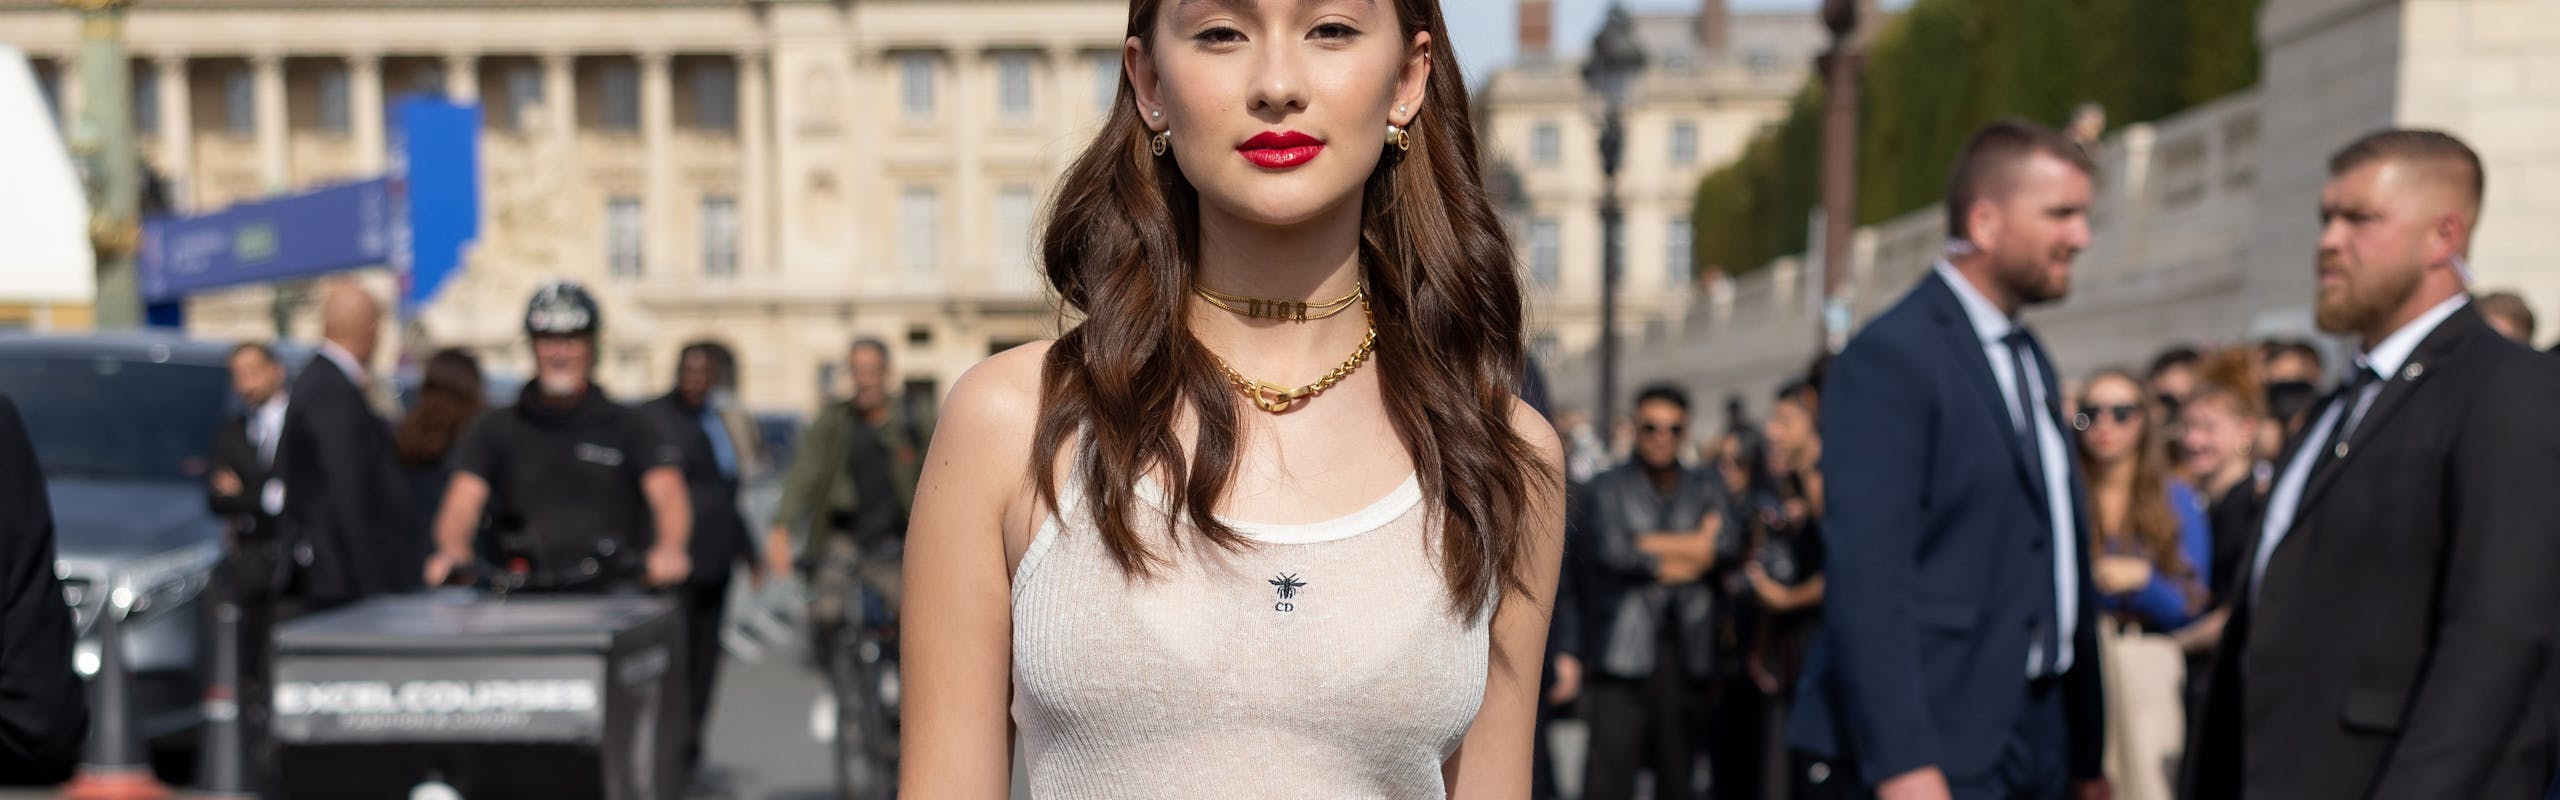 lola tung facts: Lola Tung at the Christian Dior Spring/Summer 2024 show wearing a white sheer top and skirt